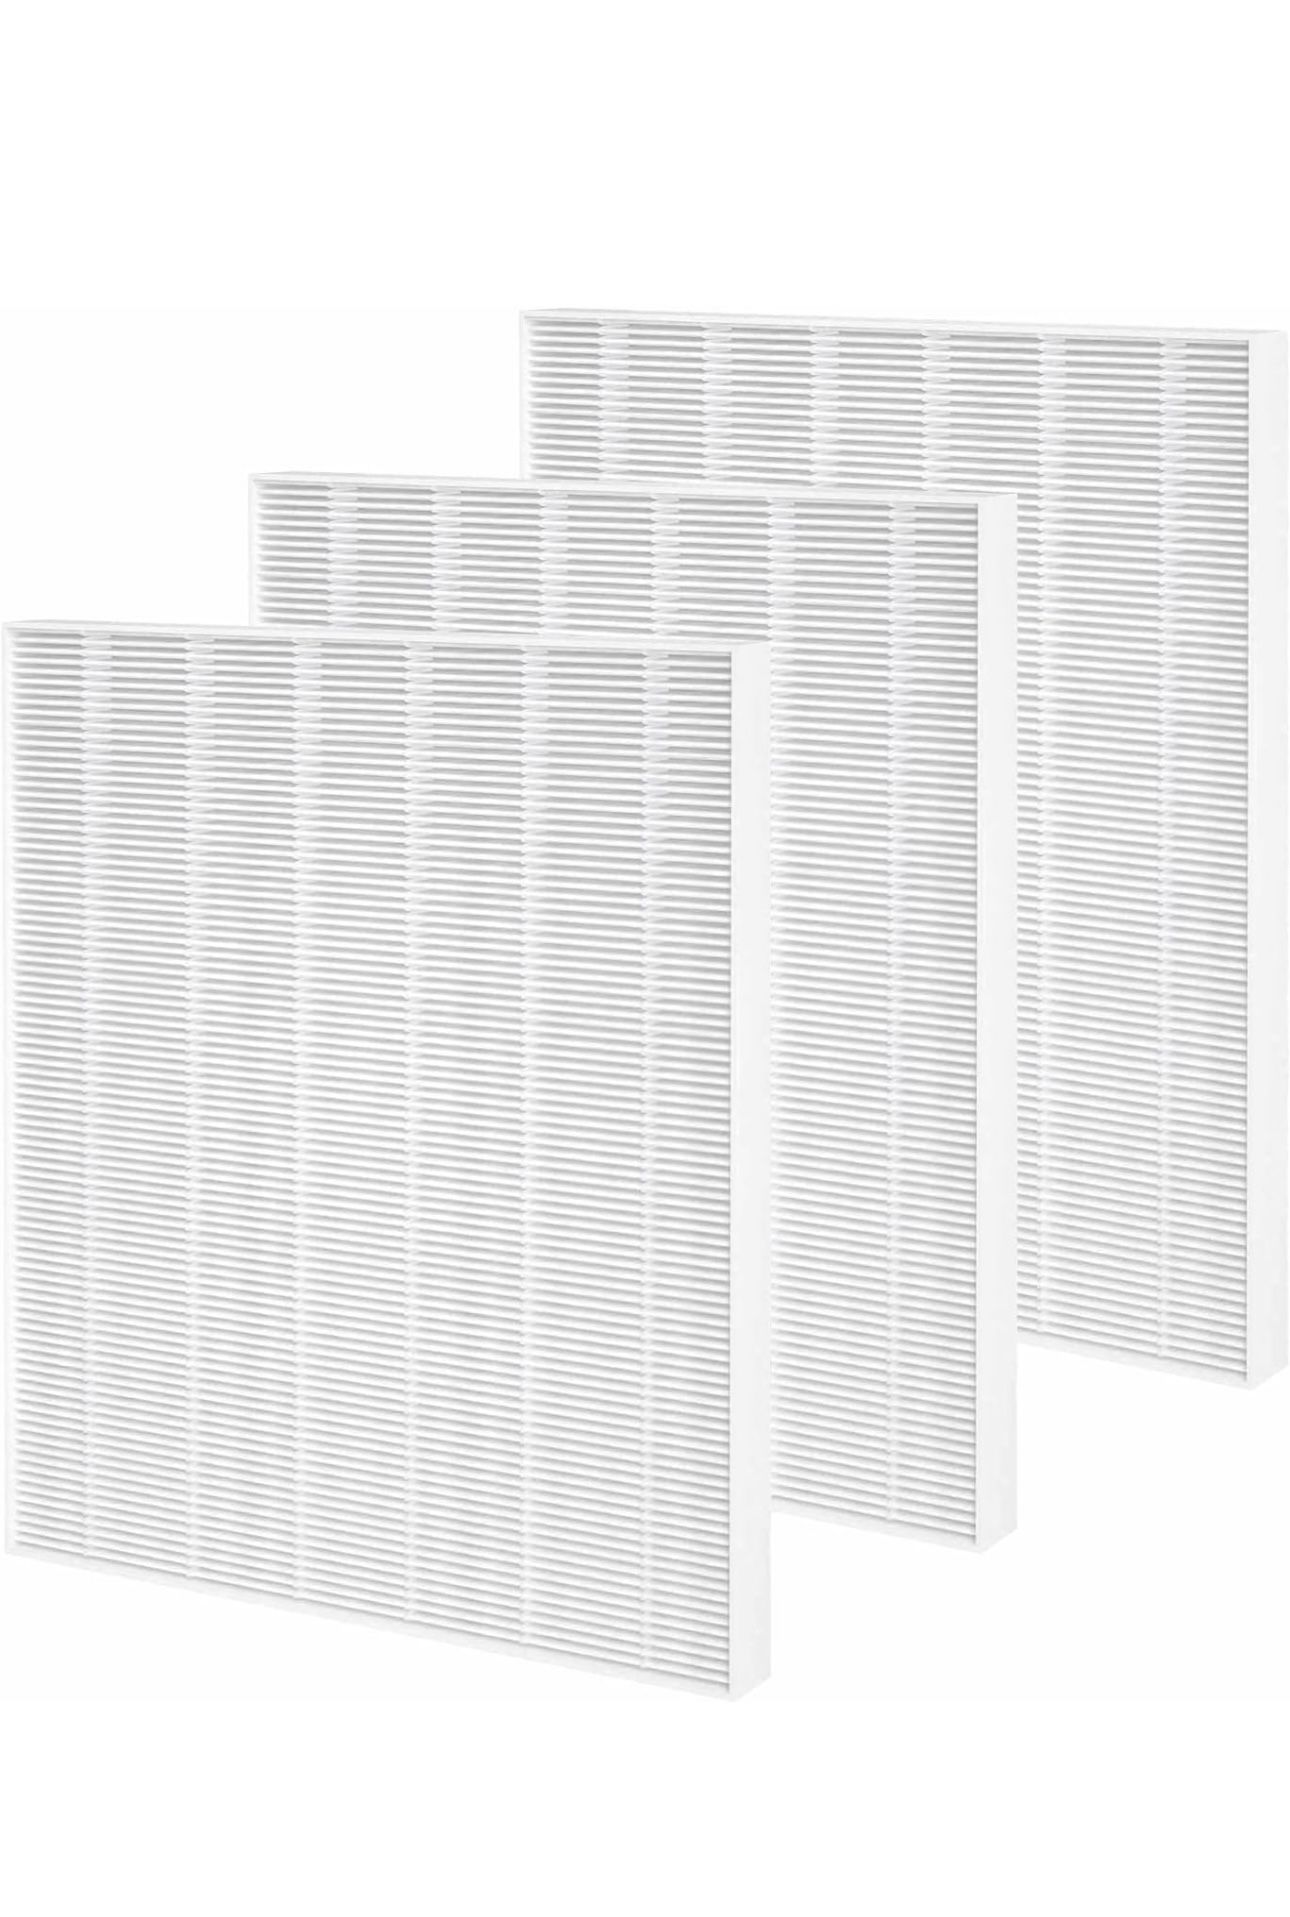 3Pack - C545 Replacement HEPA Filters Compatible with Winix C545 Air Purifier, Ture HEPA Filter S, Part number 1712-0096-00 | 2522-0058-00